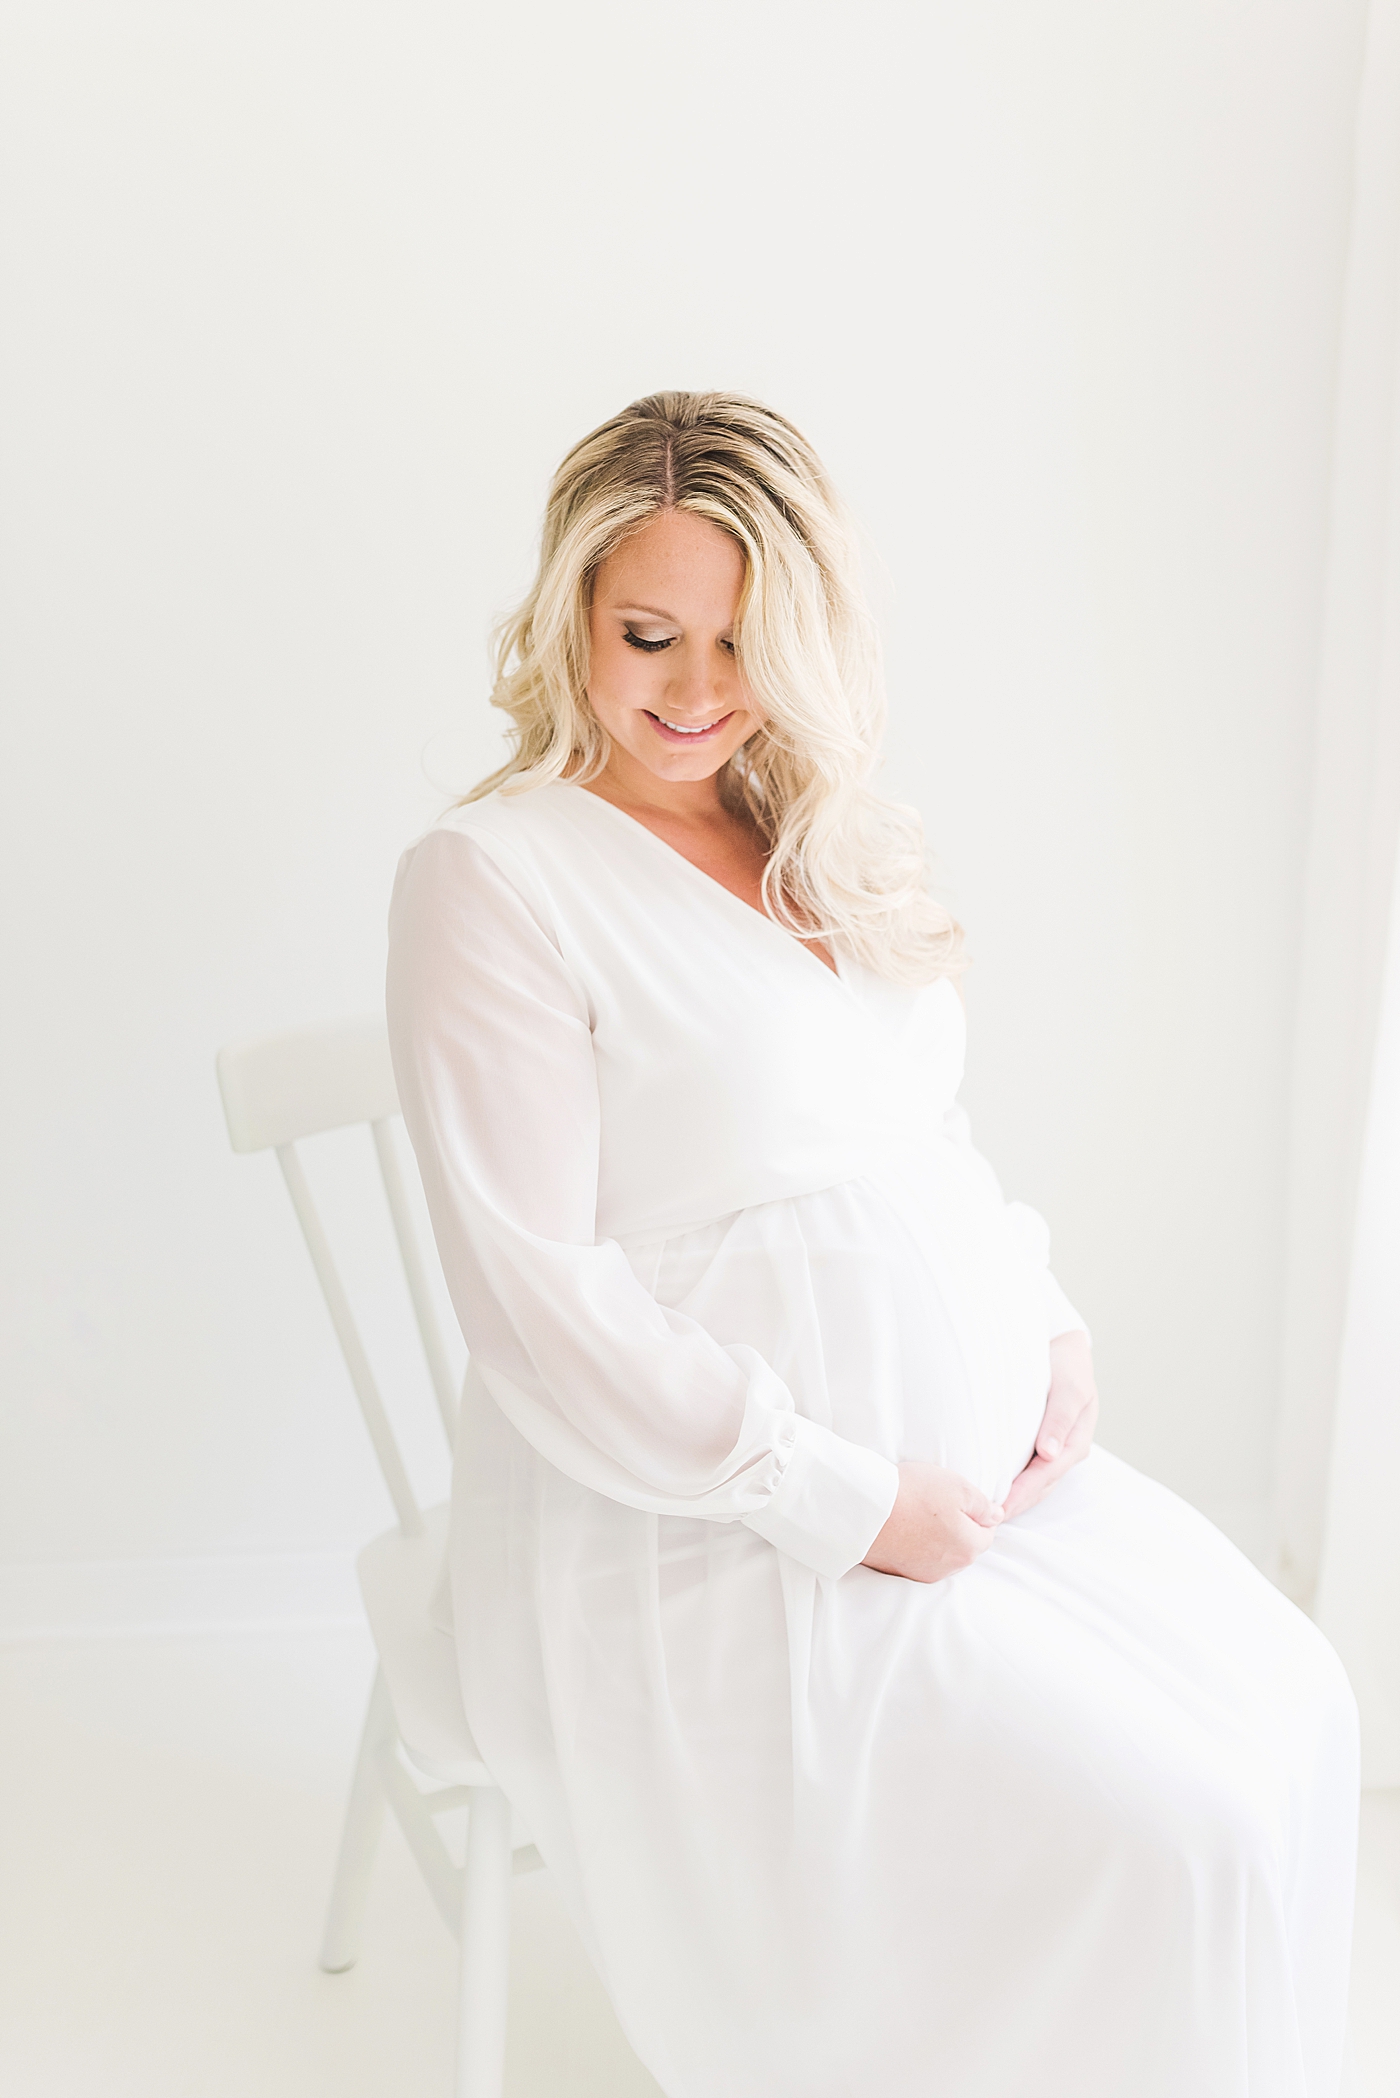 Mama to be in sheer white dress | Photo by Anna Wisjo Photography